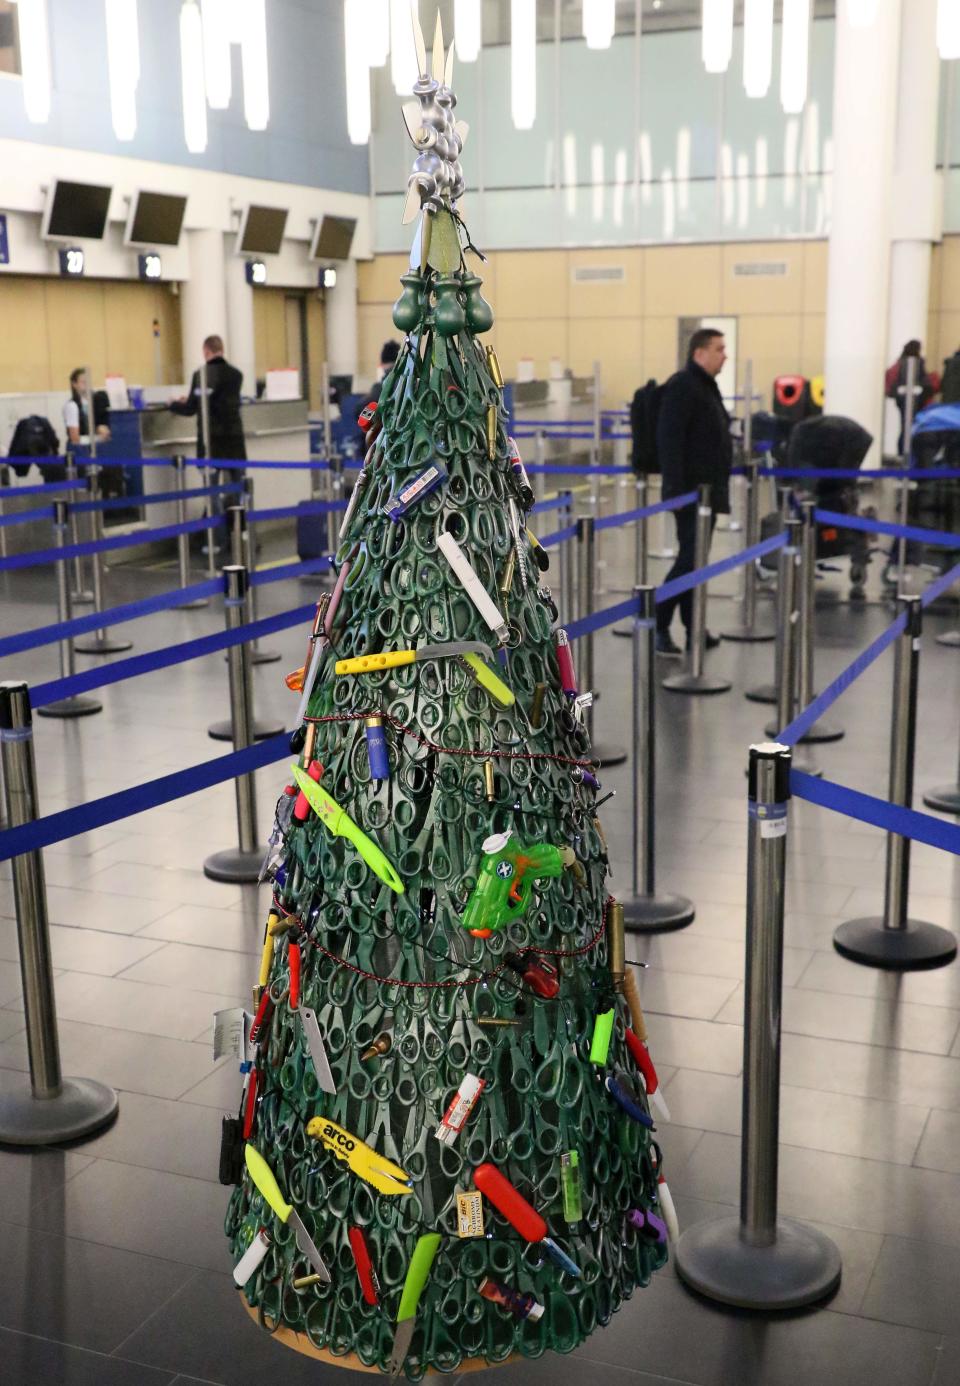 A "Christmas tree" deftly made of confiscated items on display at Vilnius Airport in Vilnius, Lithuania, on December 12, 2019.